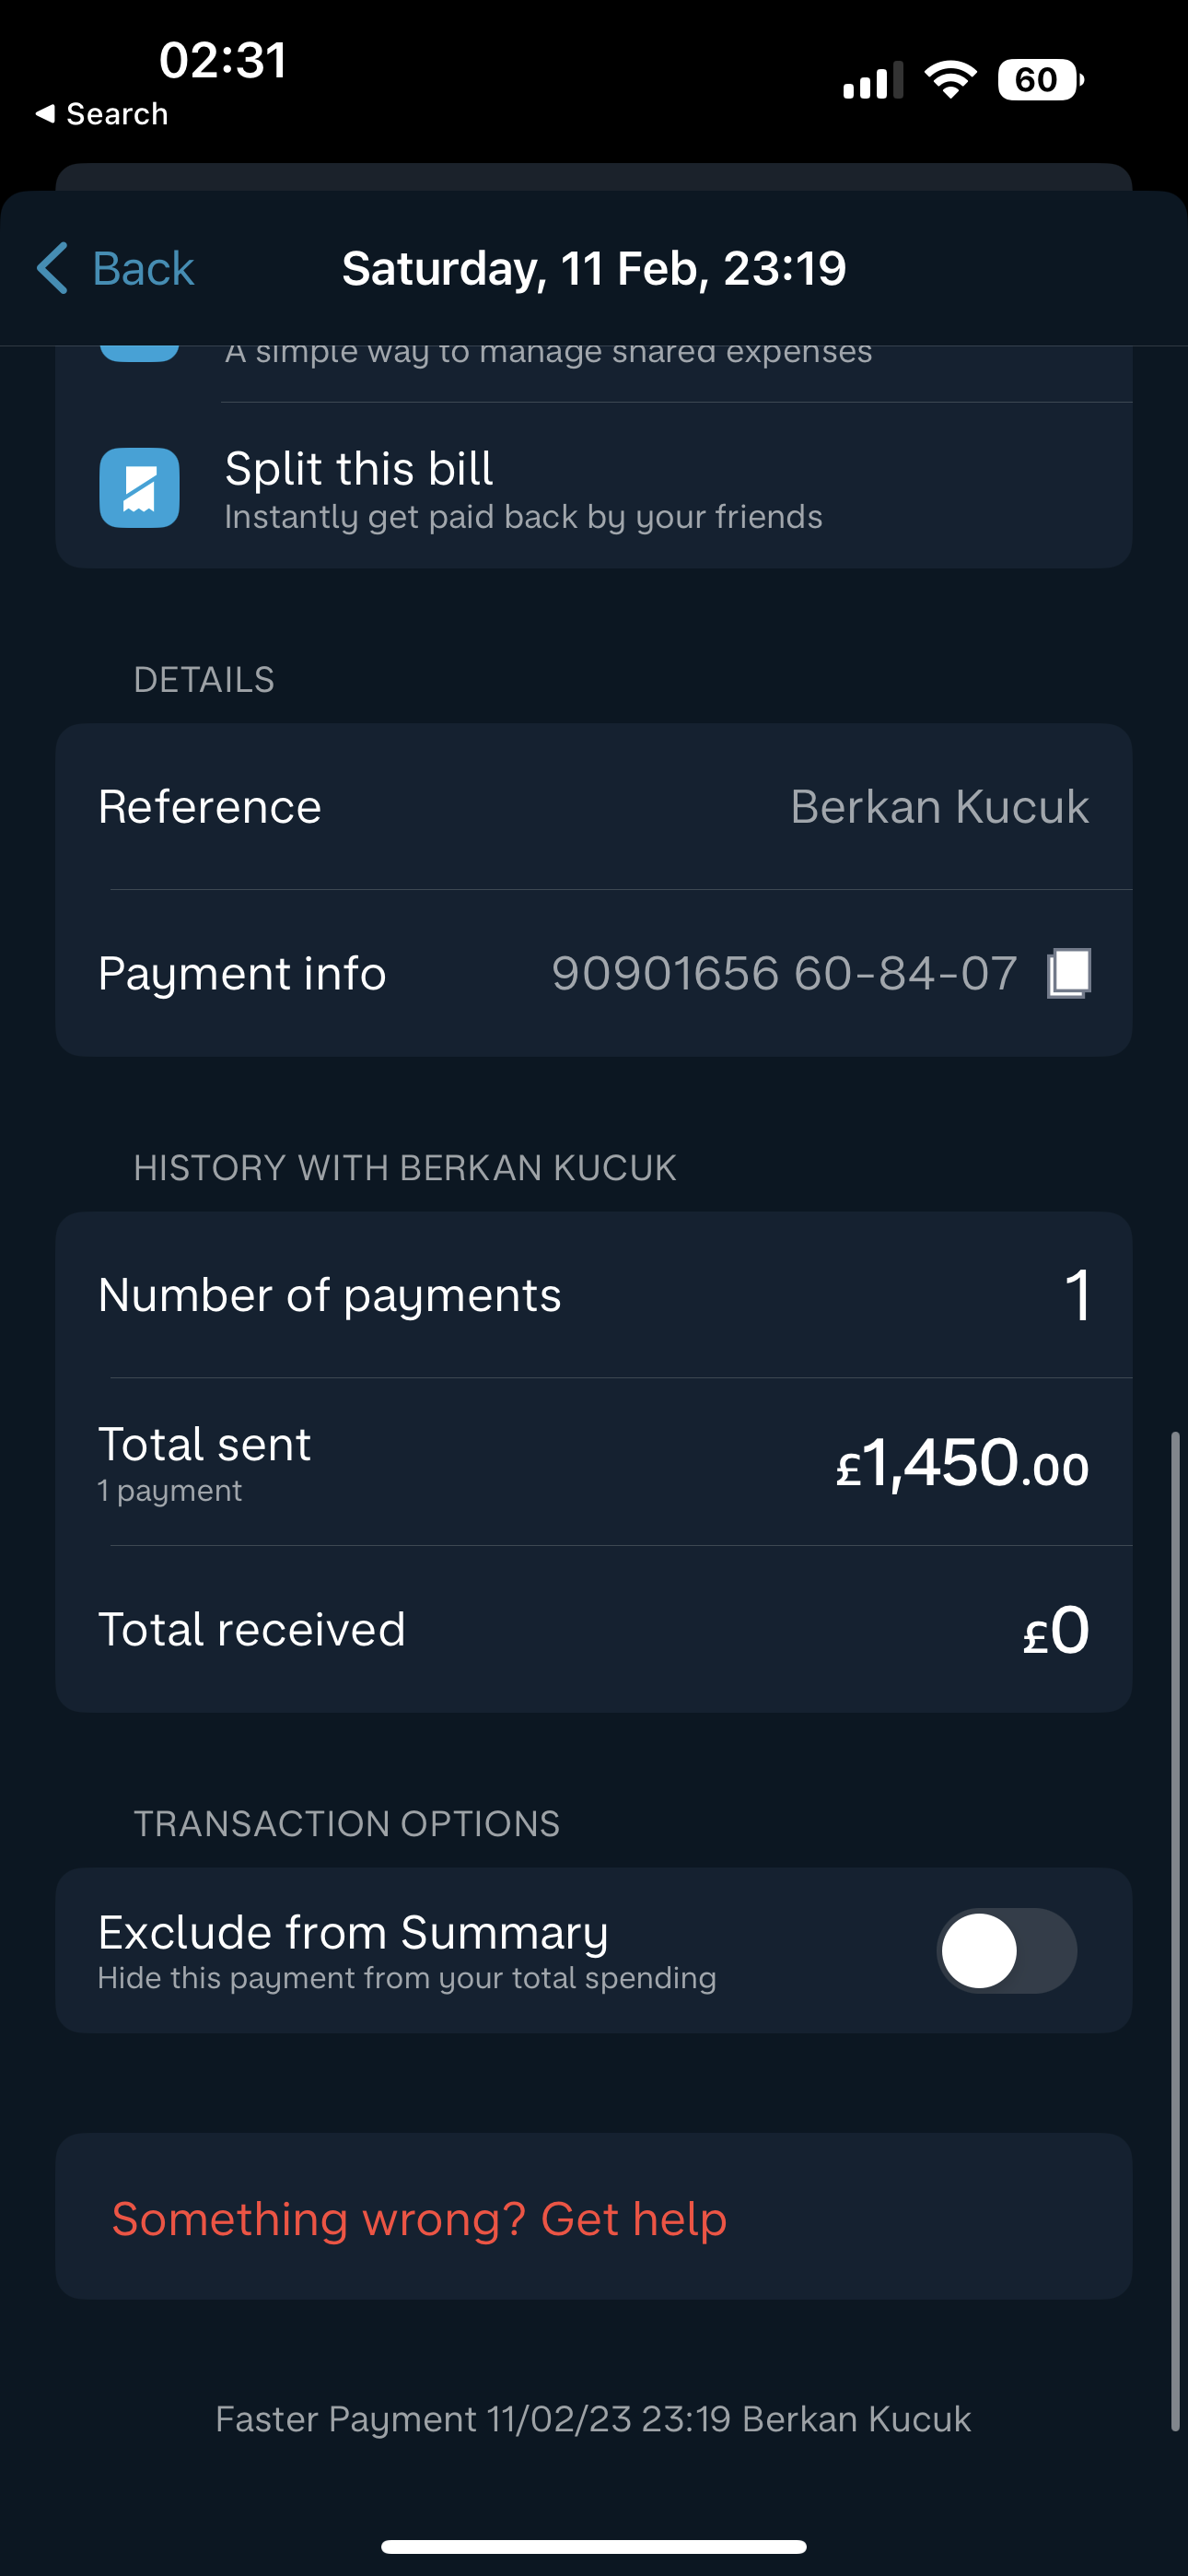  First payment I made